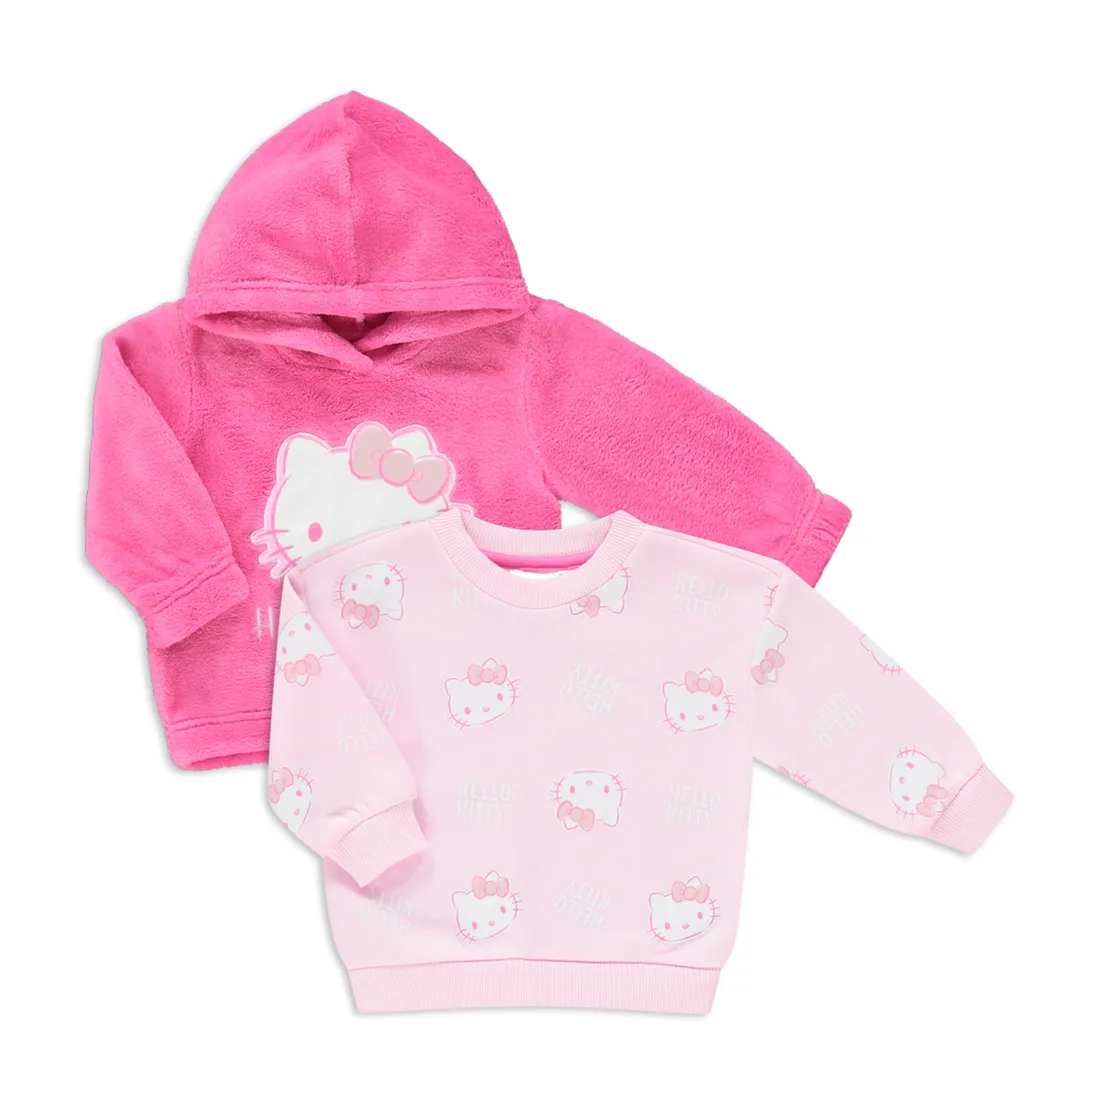 Hello Kitty 2 pack tracktops pink - Baby GIRLS 3-36 MONTHS | Ackermans